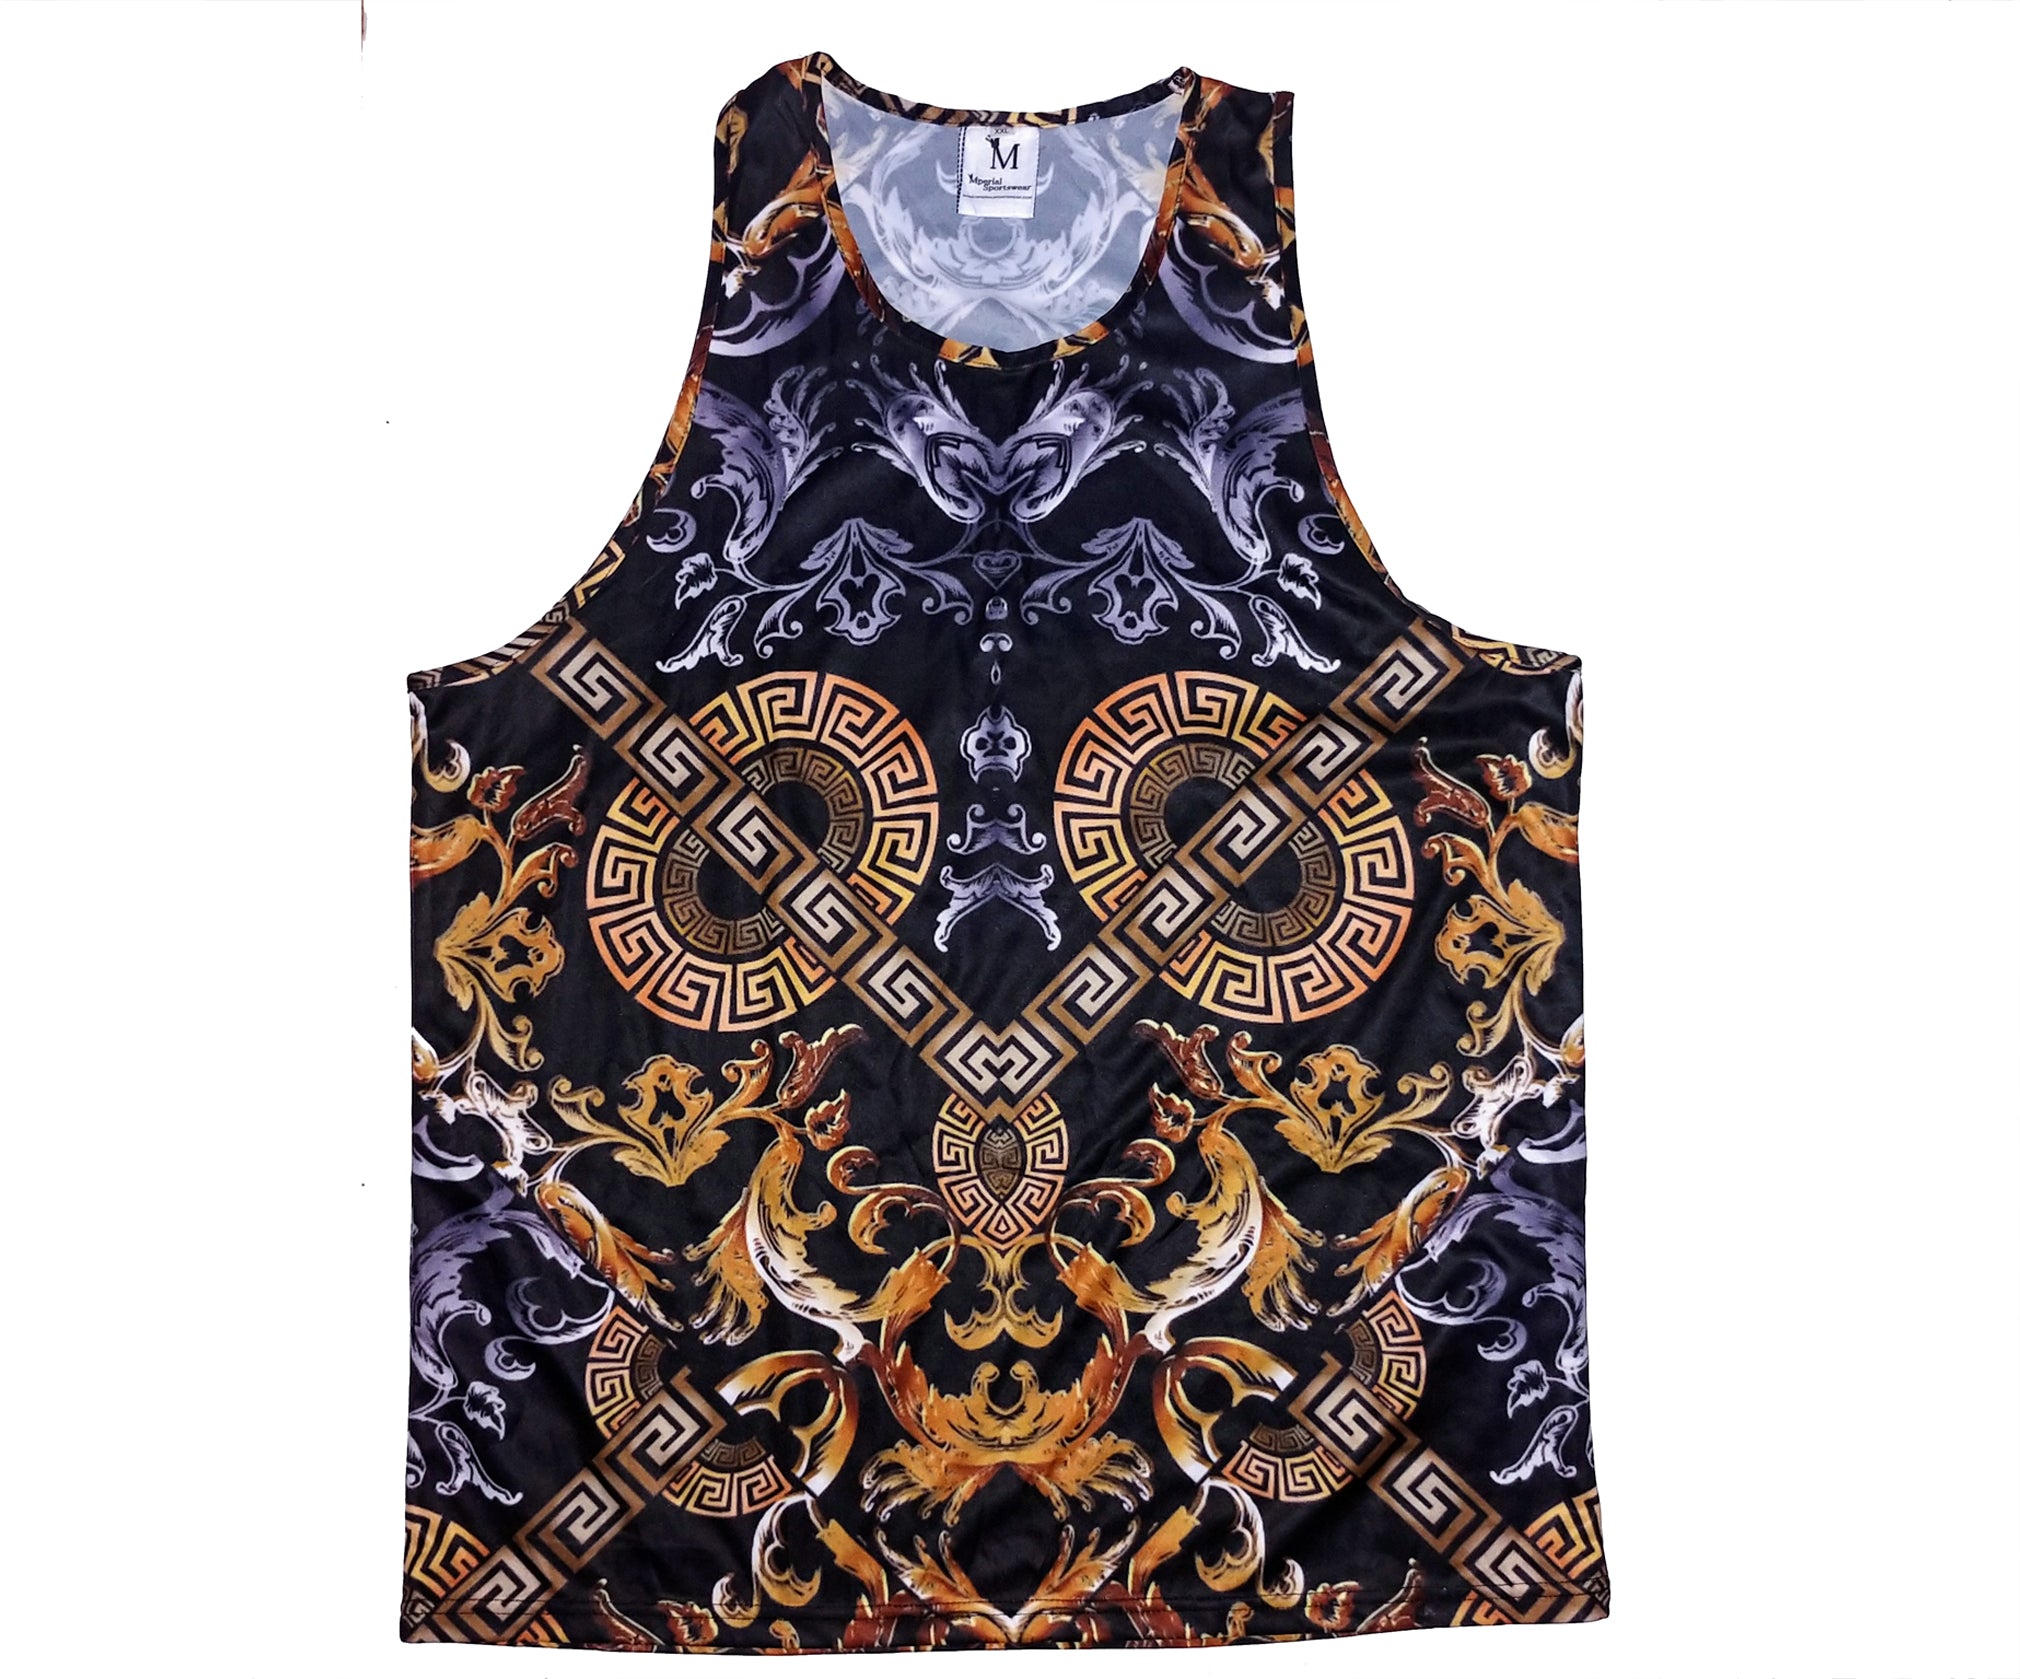 Mperial Lux Tank Top